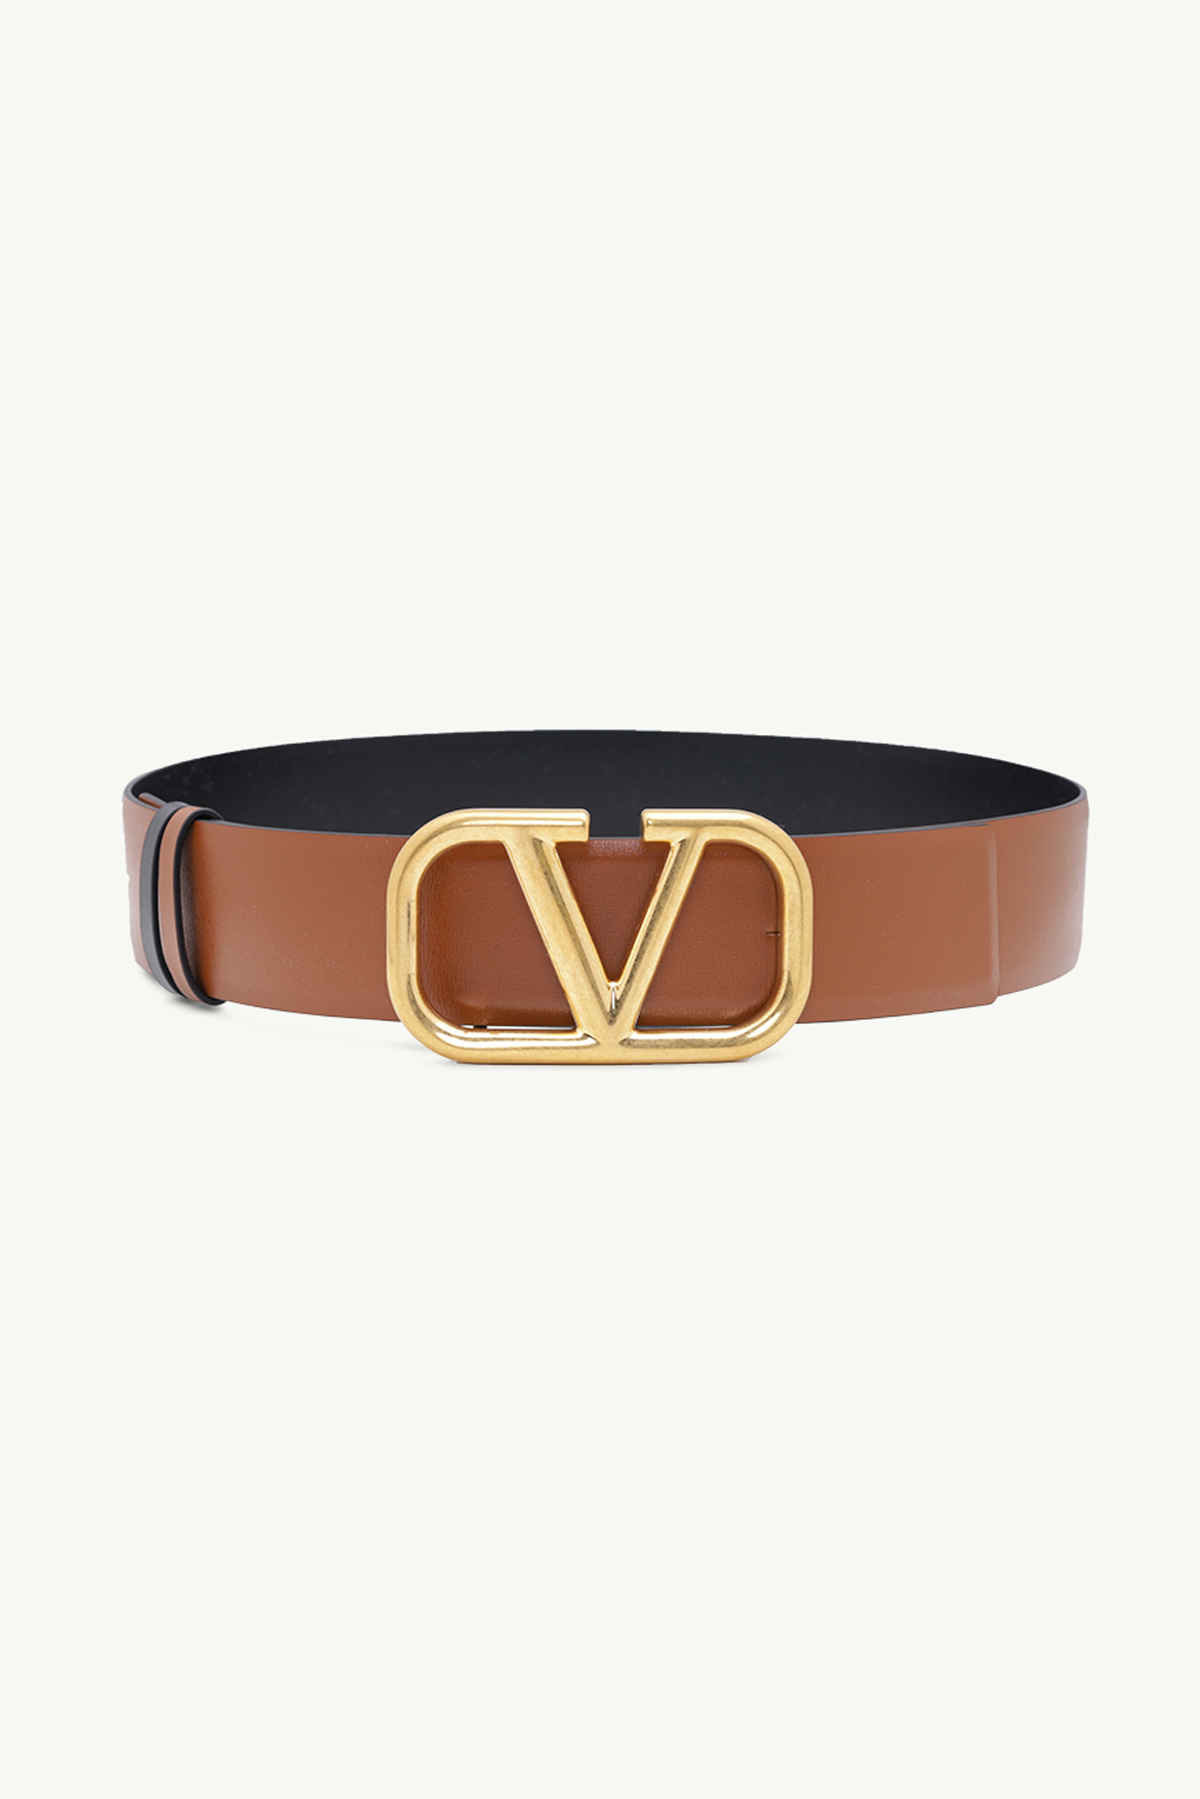 VALENTINO Reversible Belt 4cm in Black/Brown Leather with VLogo Buckle 0